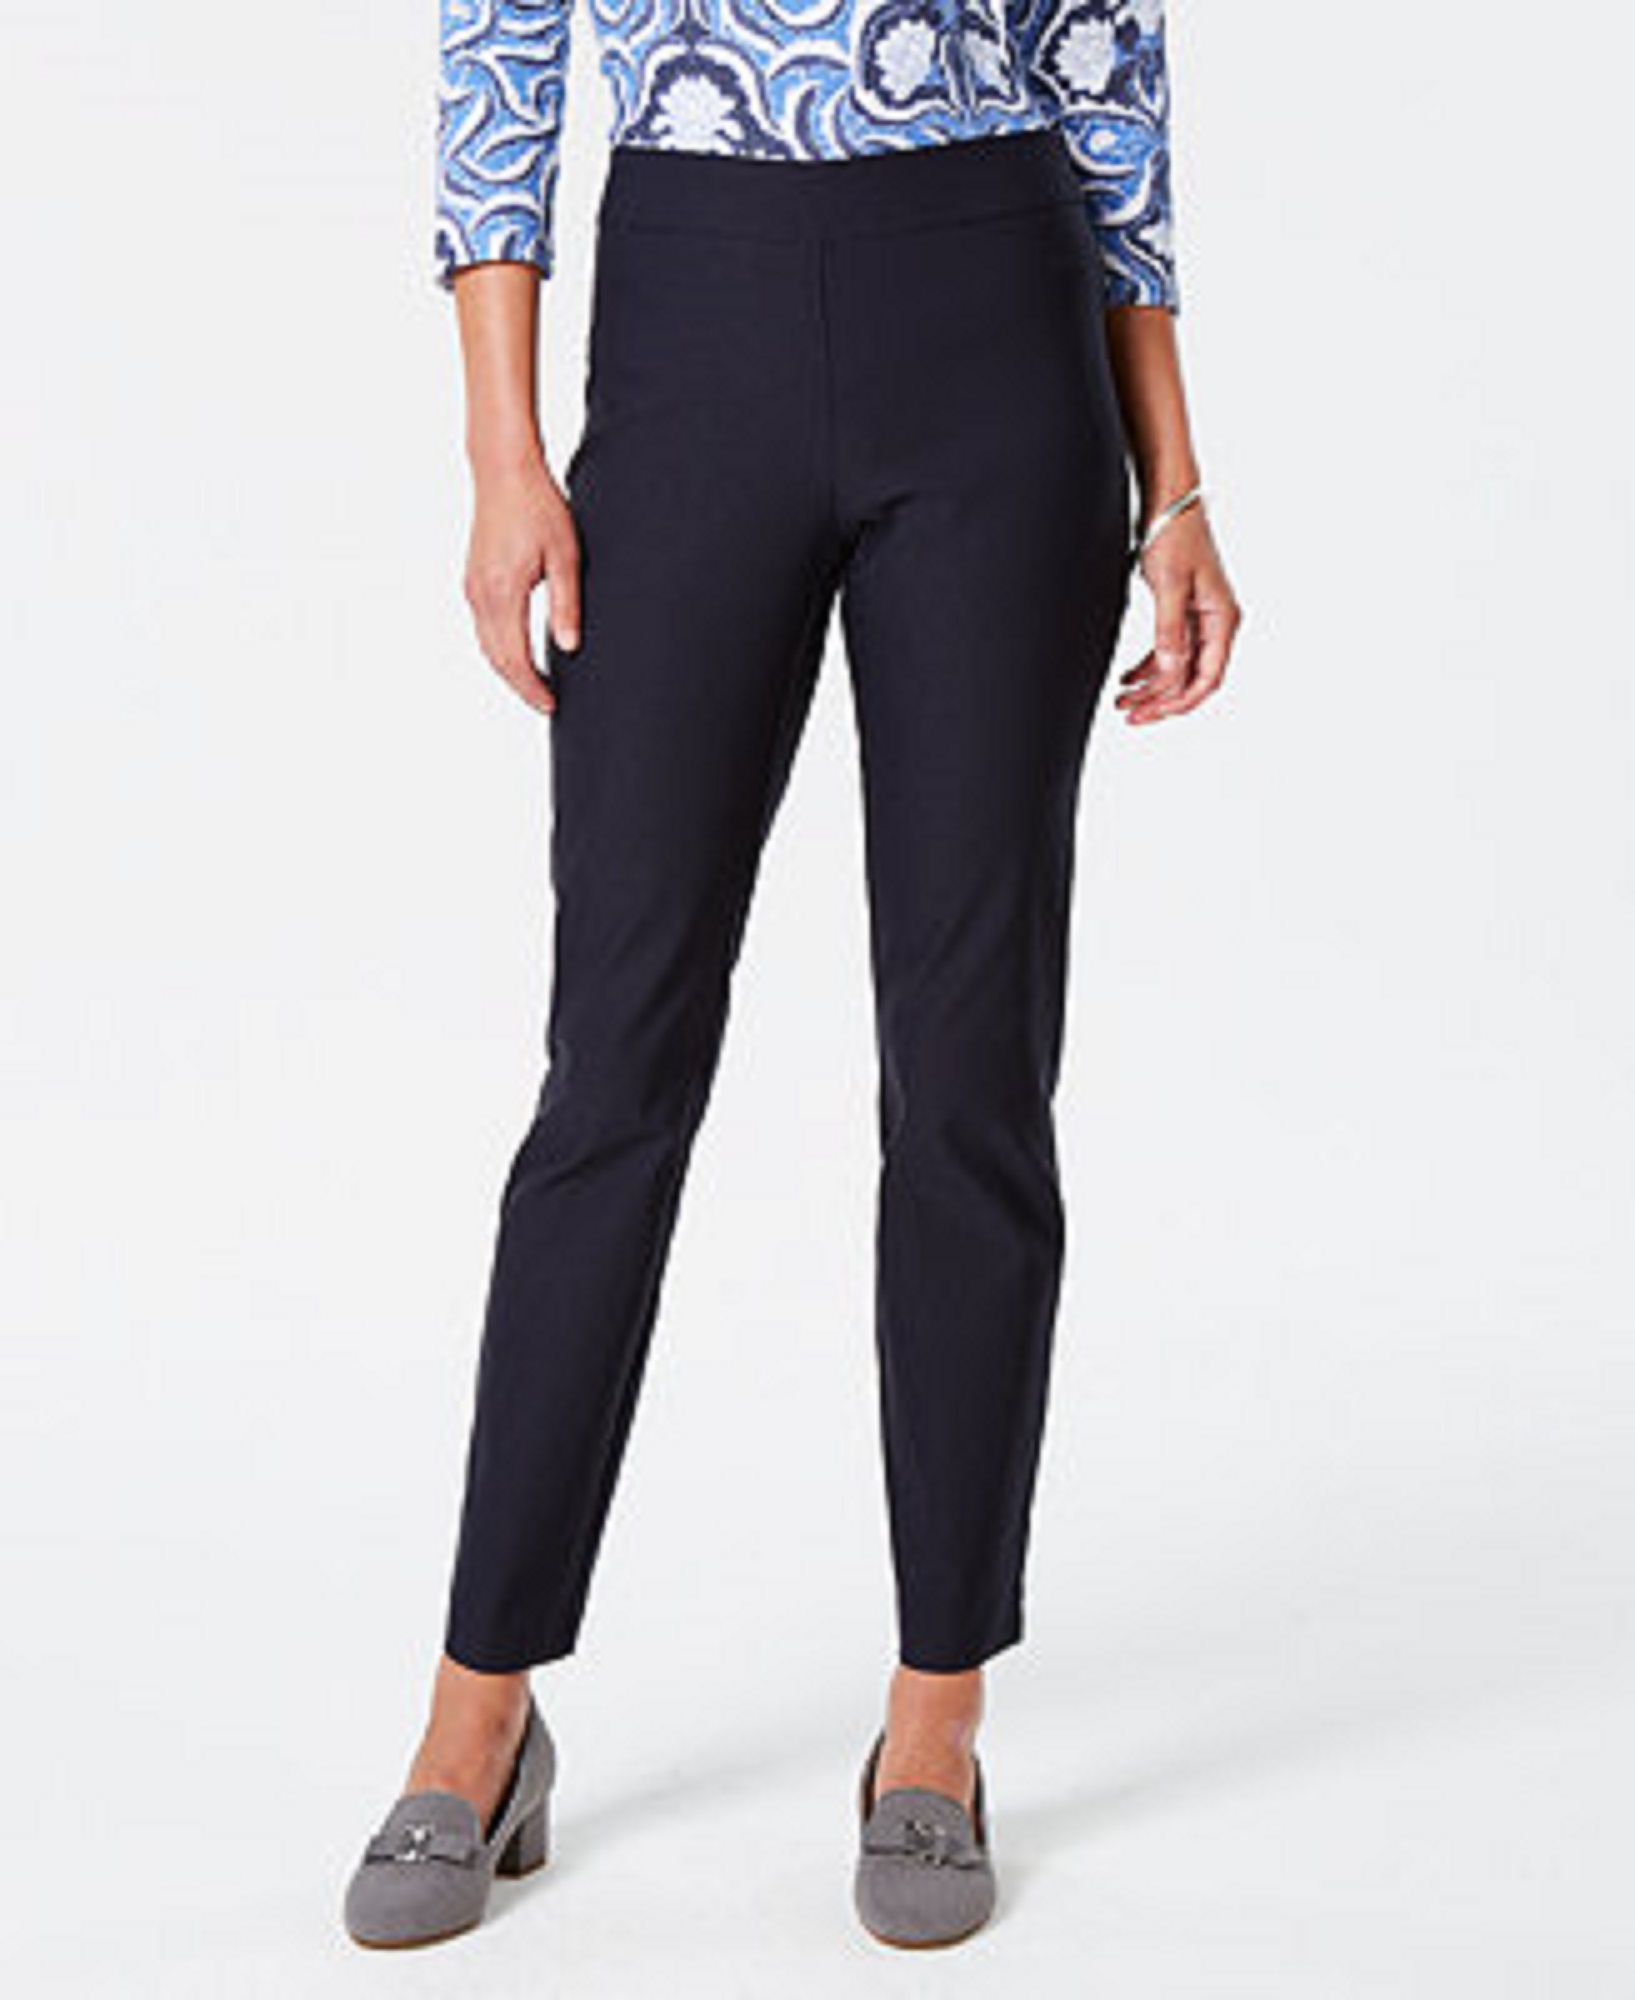 Charter Club Women's Pants with Free Shipping - Sears